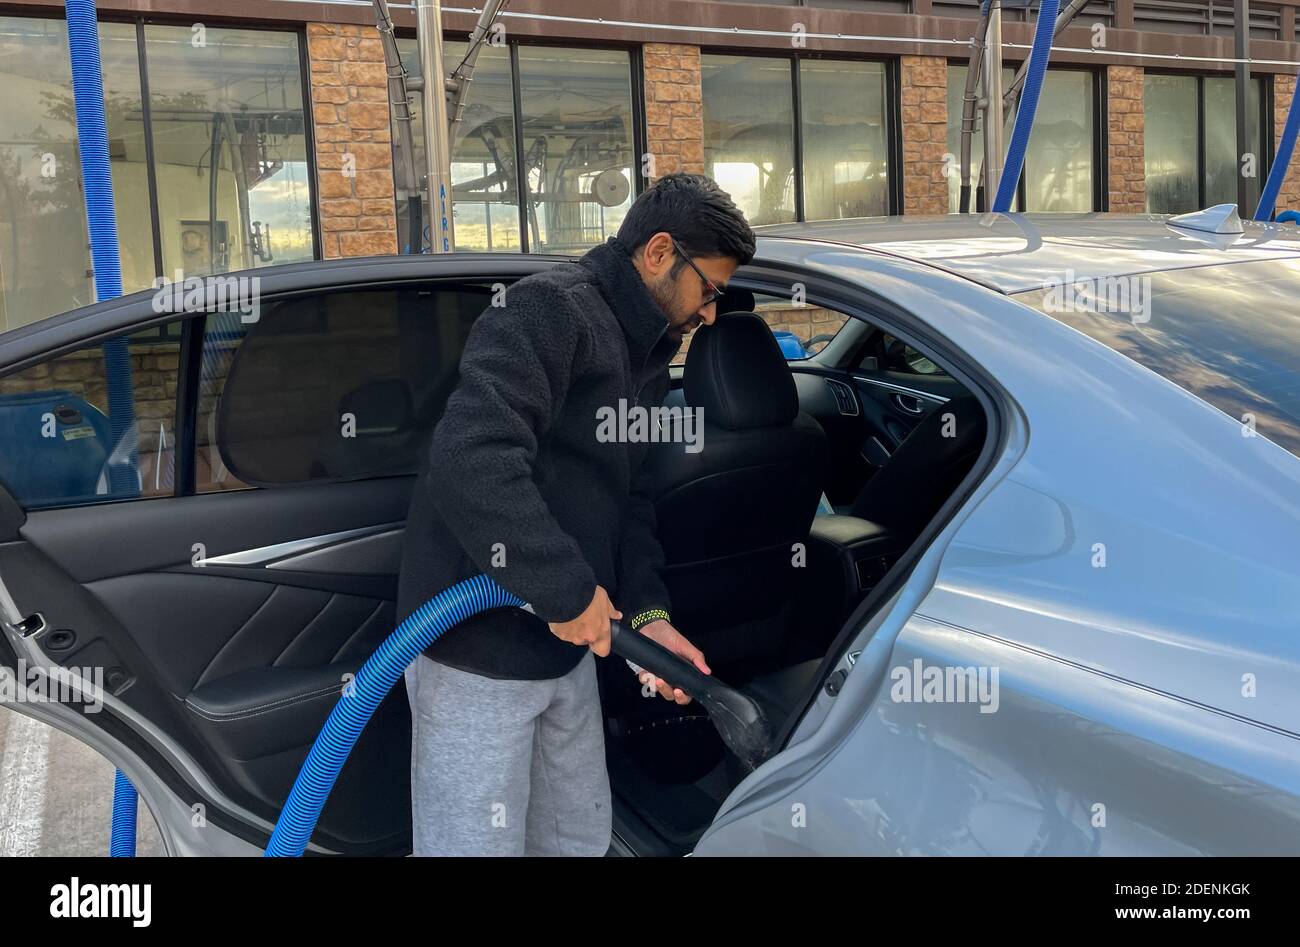 Mckinney, TX / USA - November 30, 2020: Close up view of a man using the vacuum hose to vacuum his car in the self serve vacuum parking lot Stock Photo